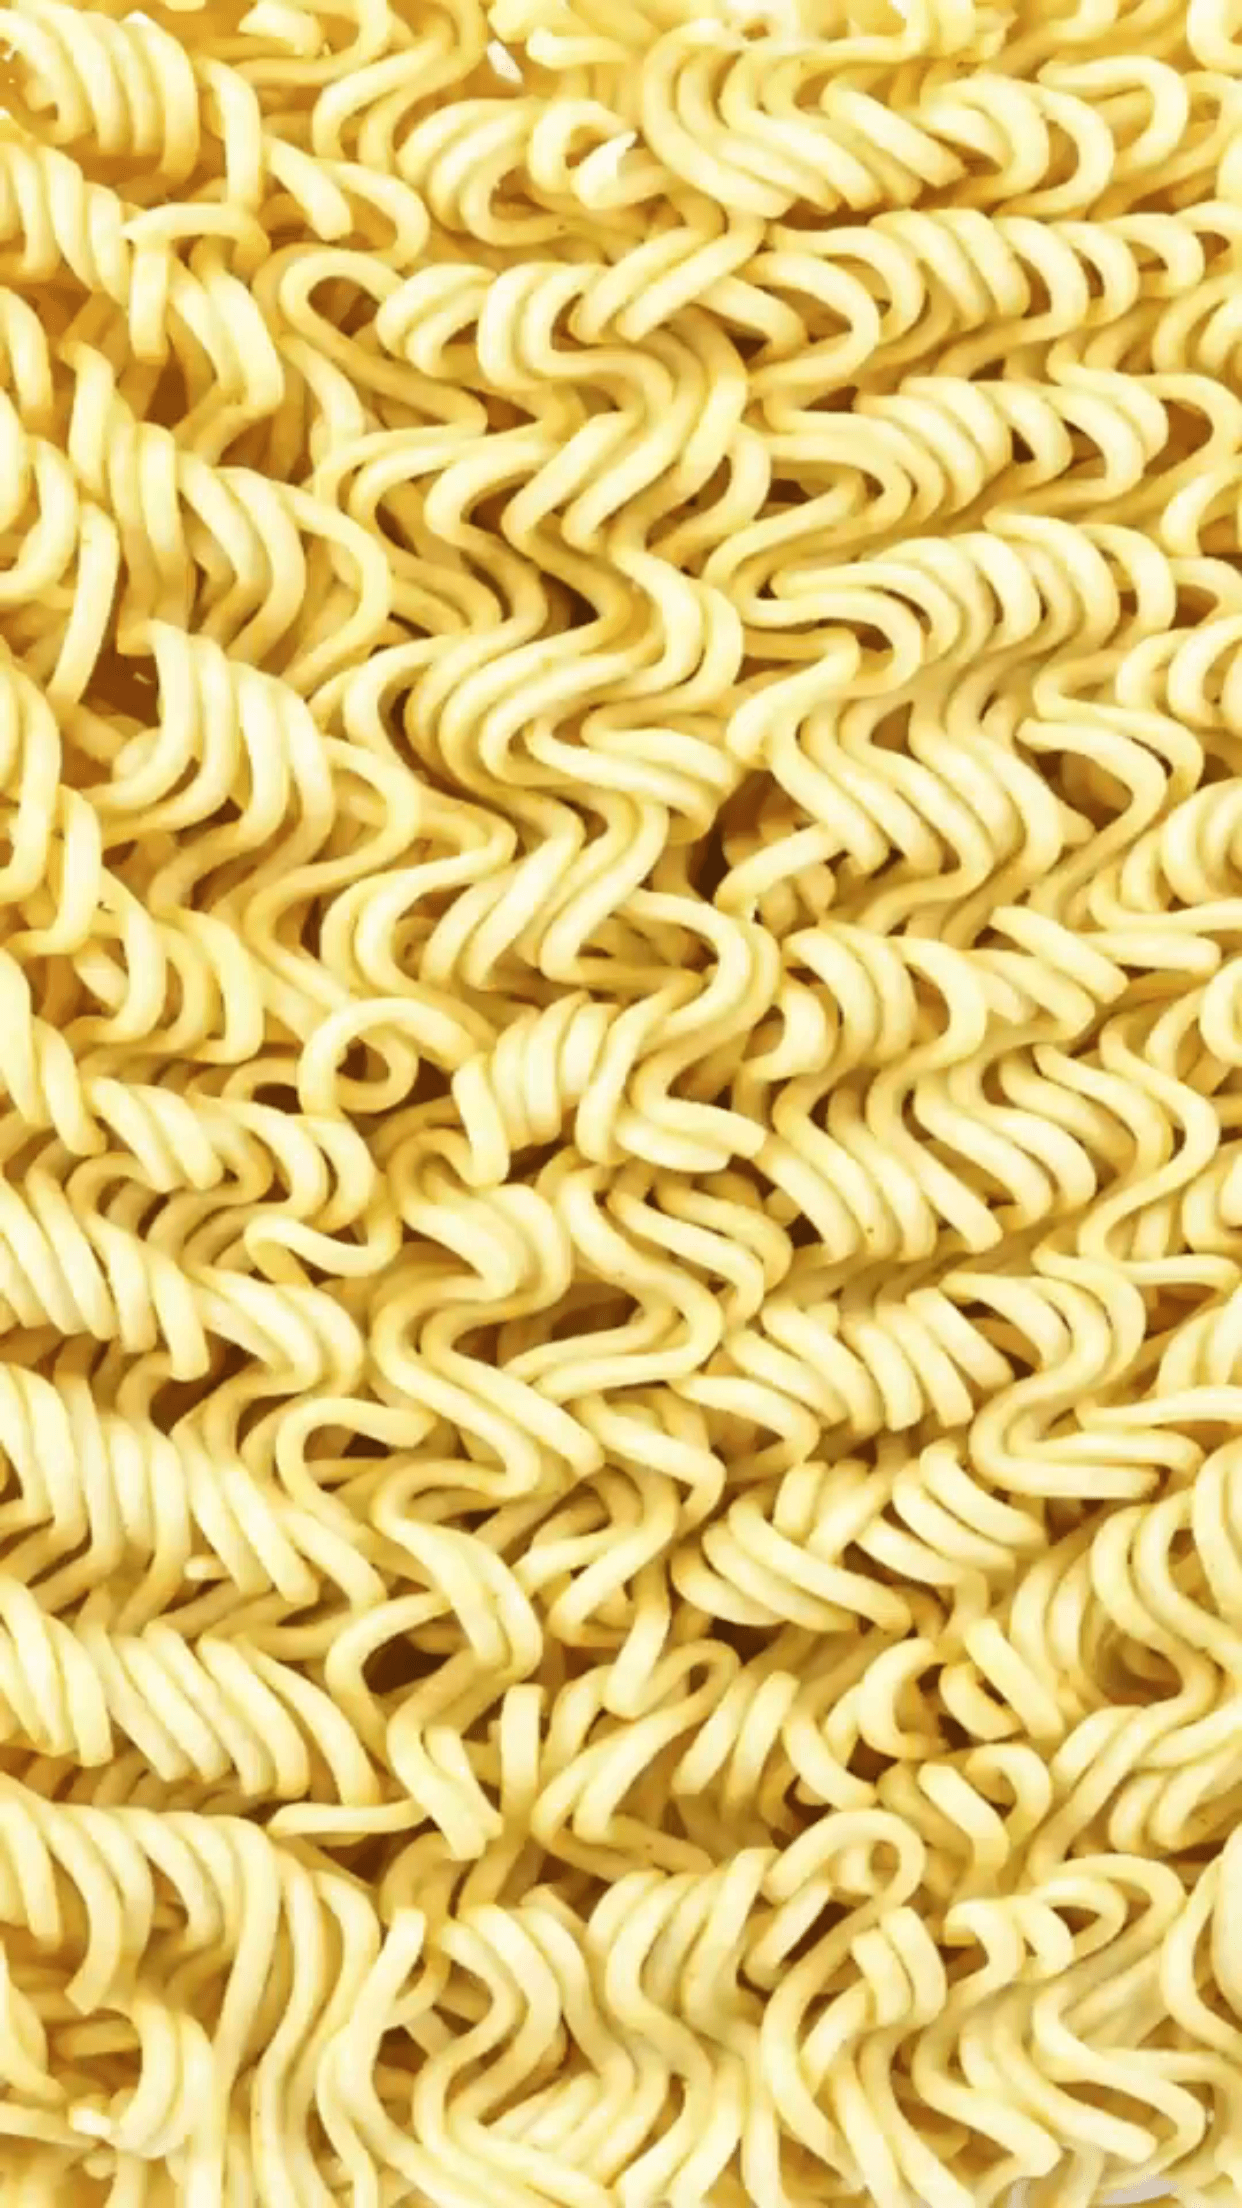 500 Ramen Pictures HD  Download Free Images on Unsplash